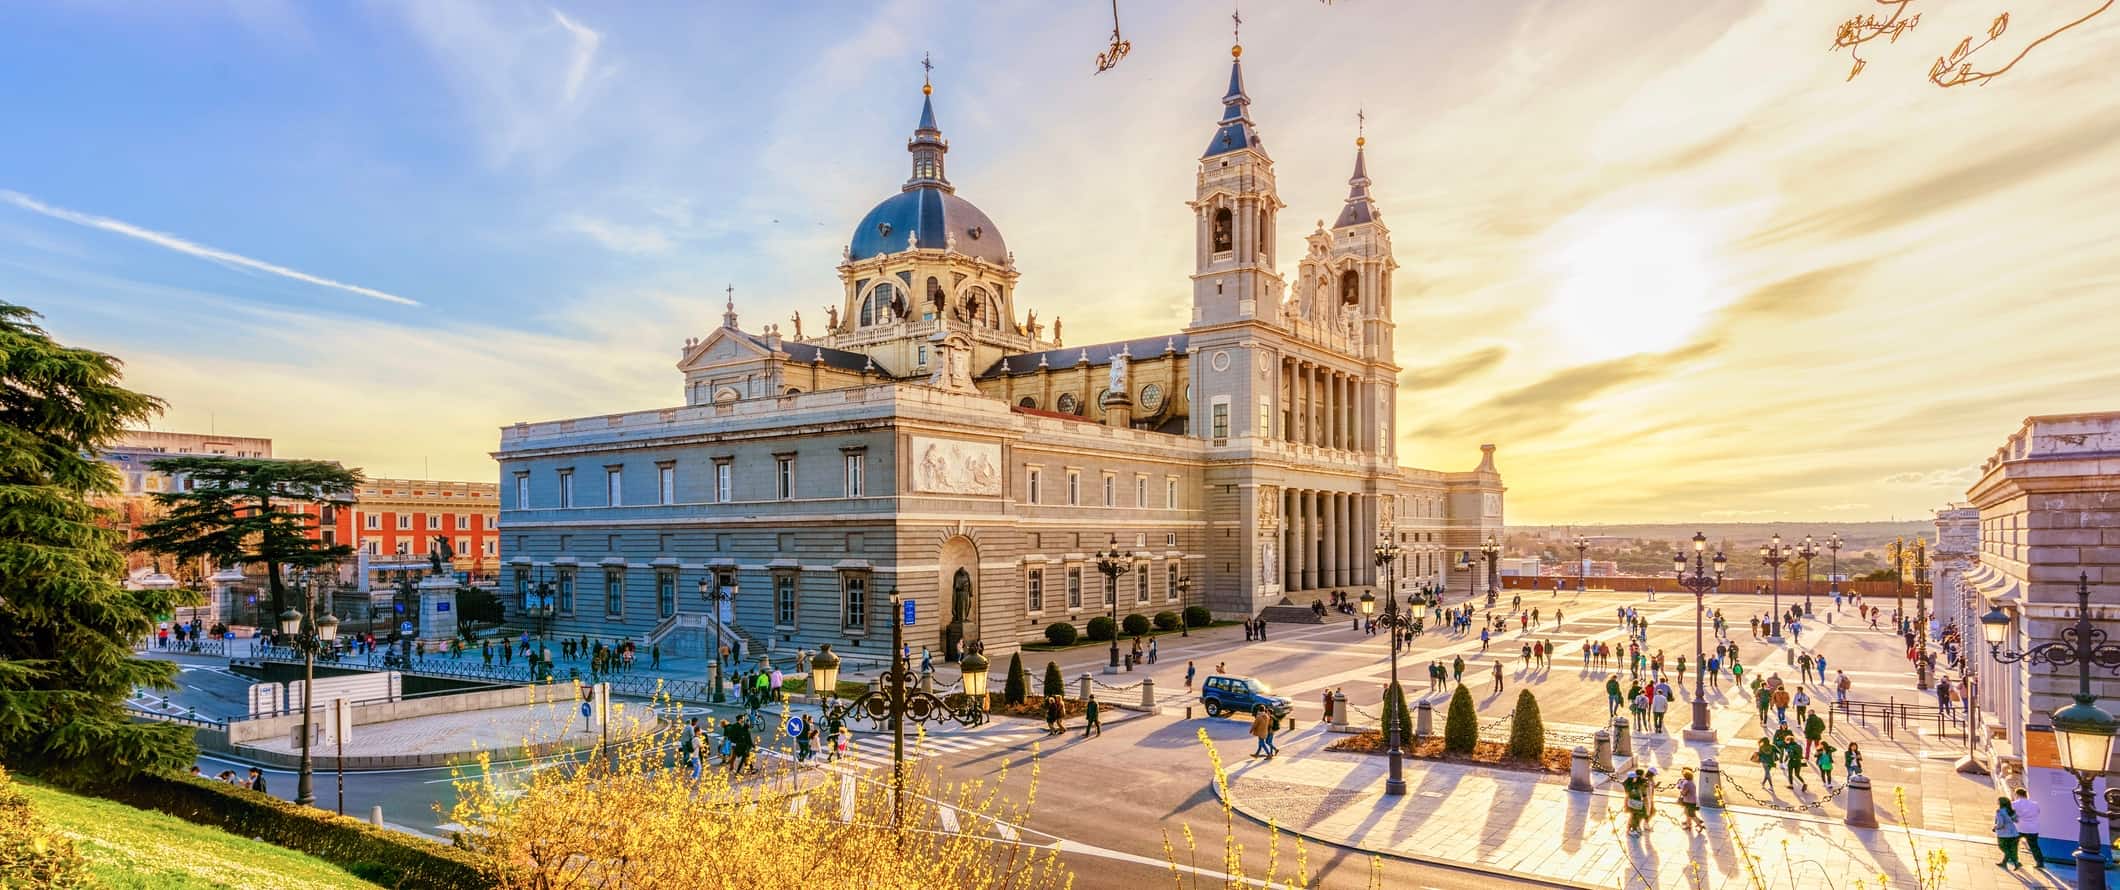 The stunning and historic architecture of Madrid, Spain near a large plaza during sunset